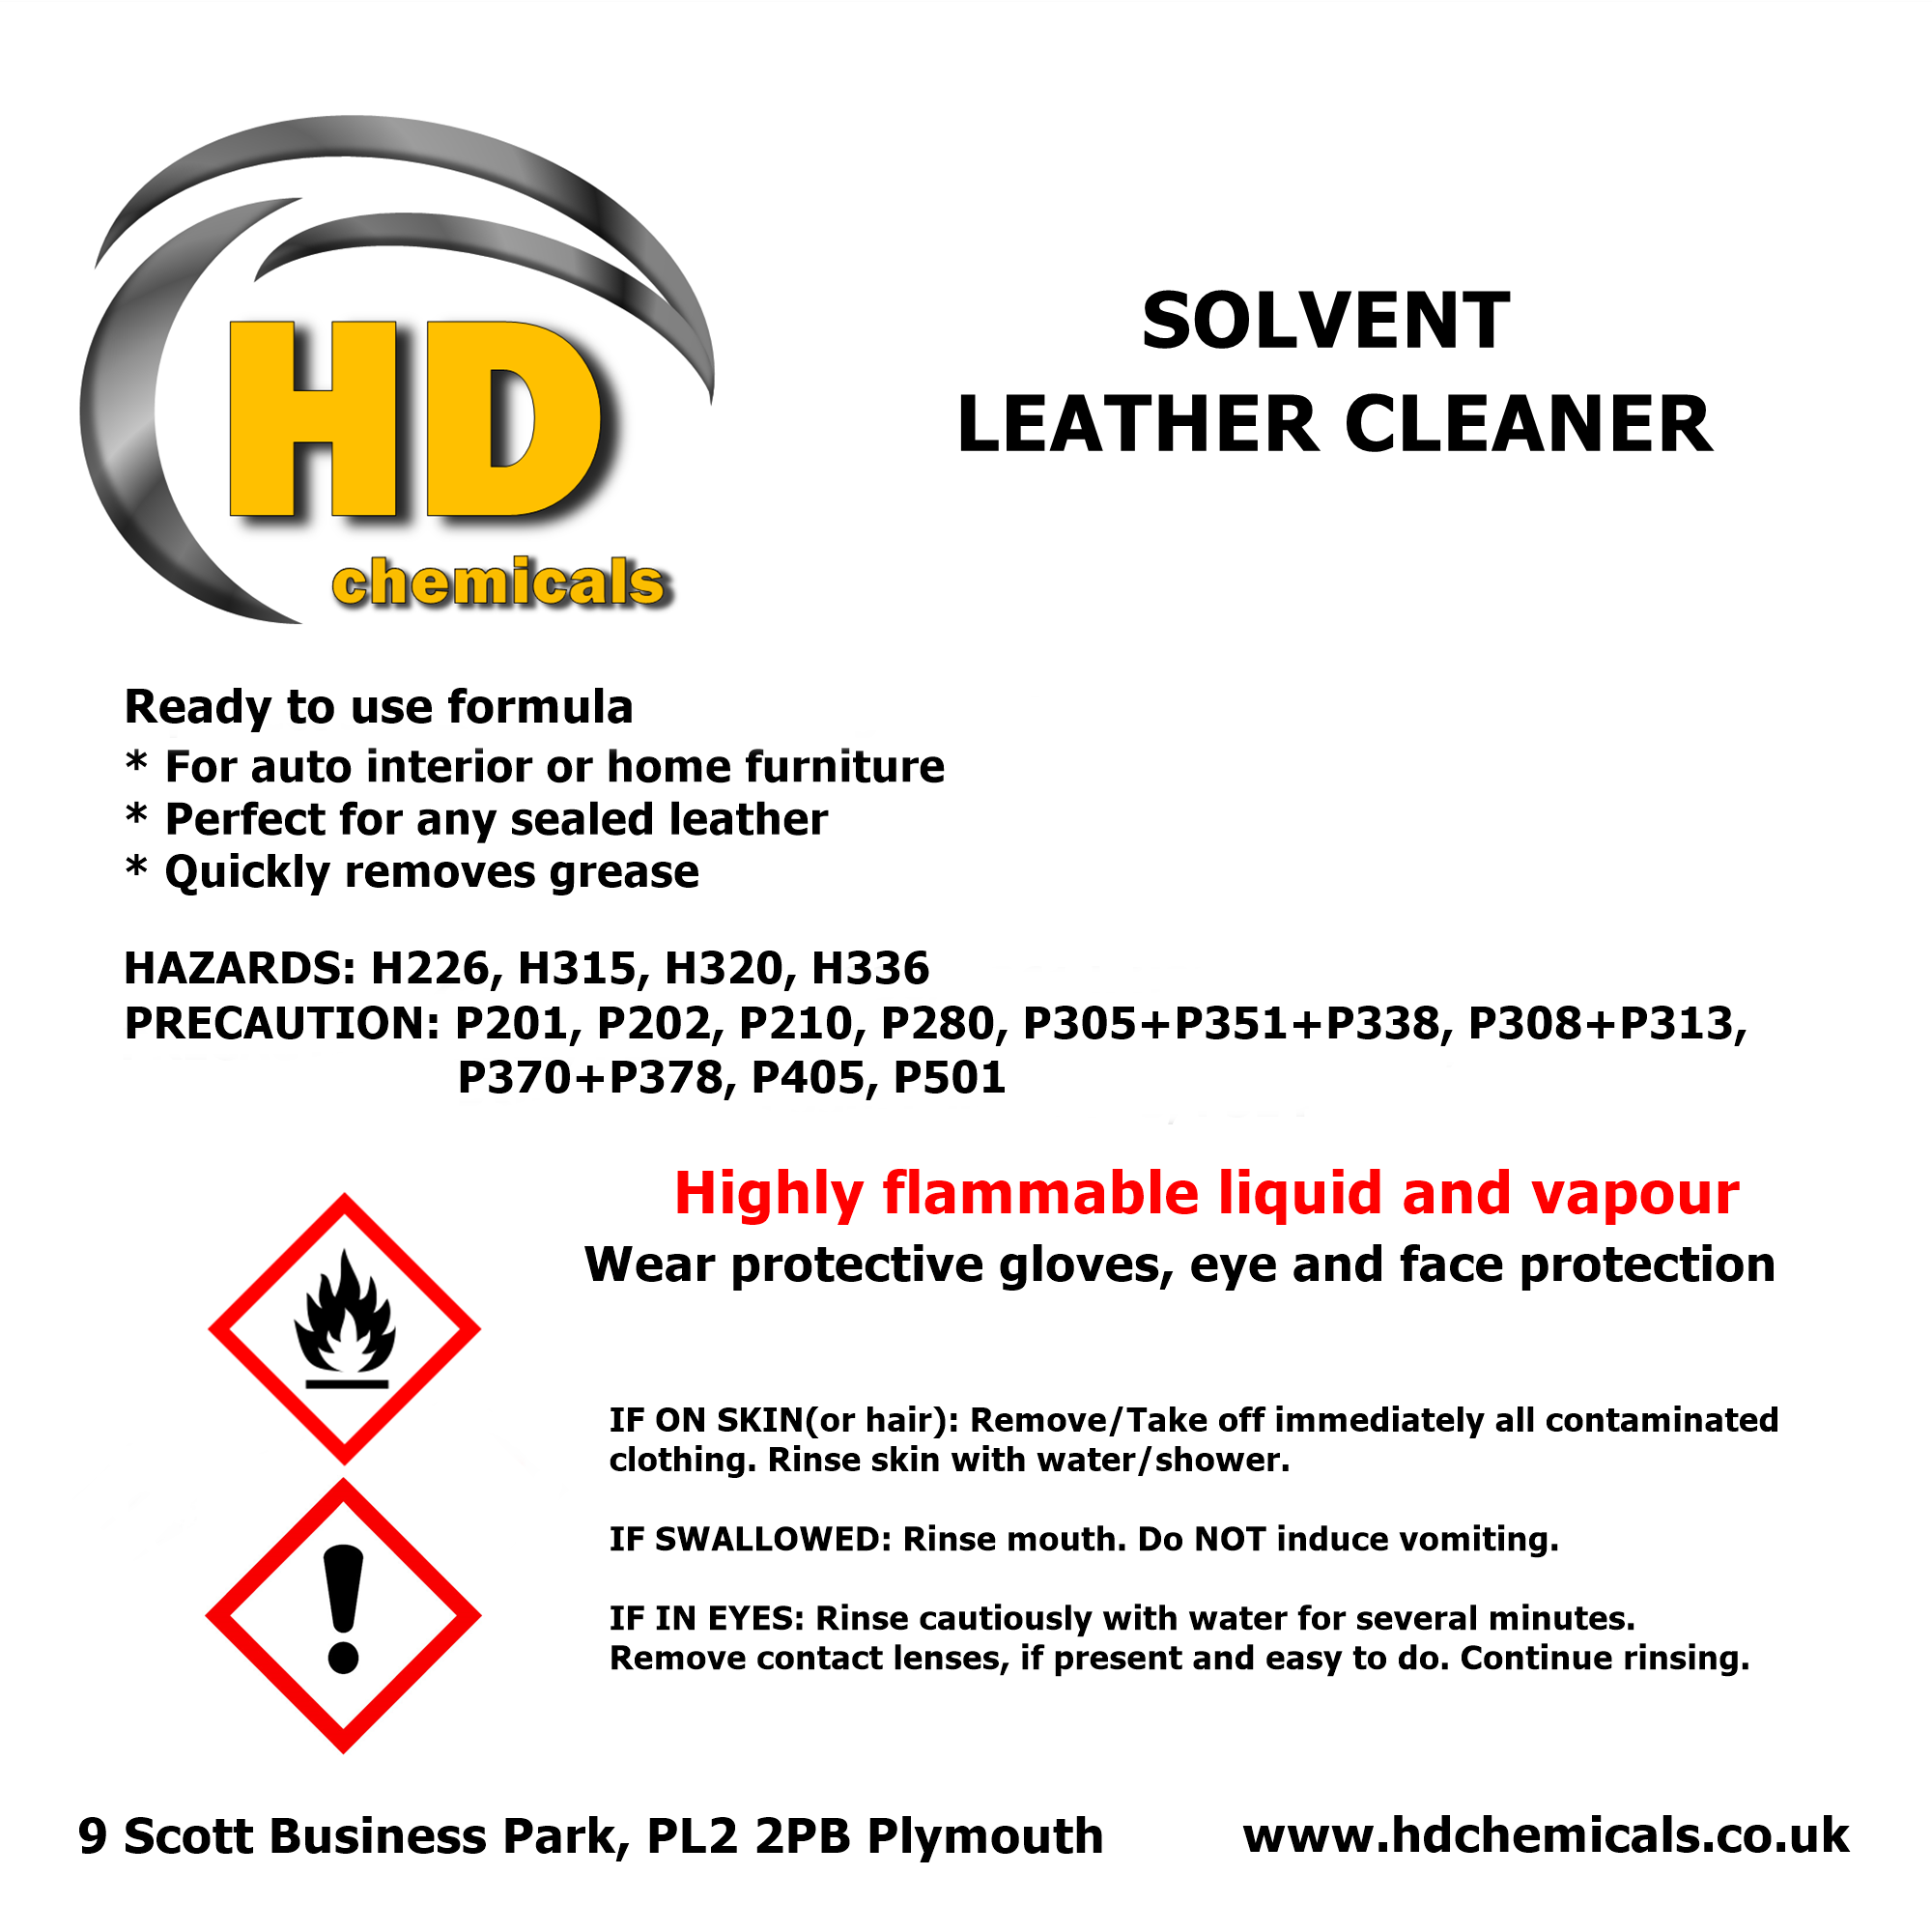 Solvent Leather Cleaner.